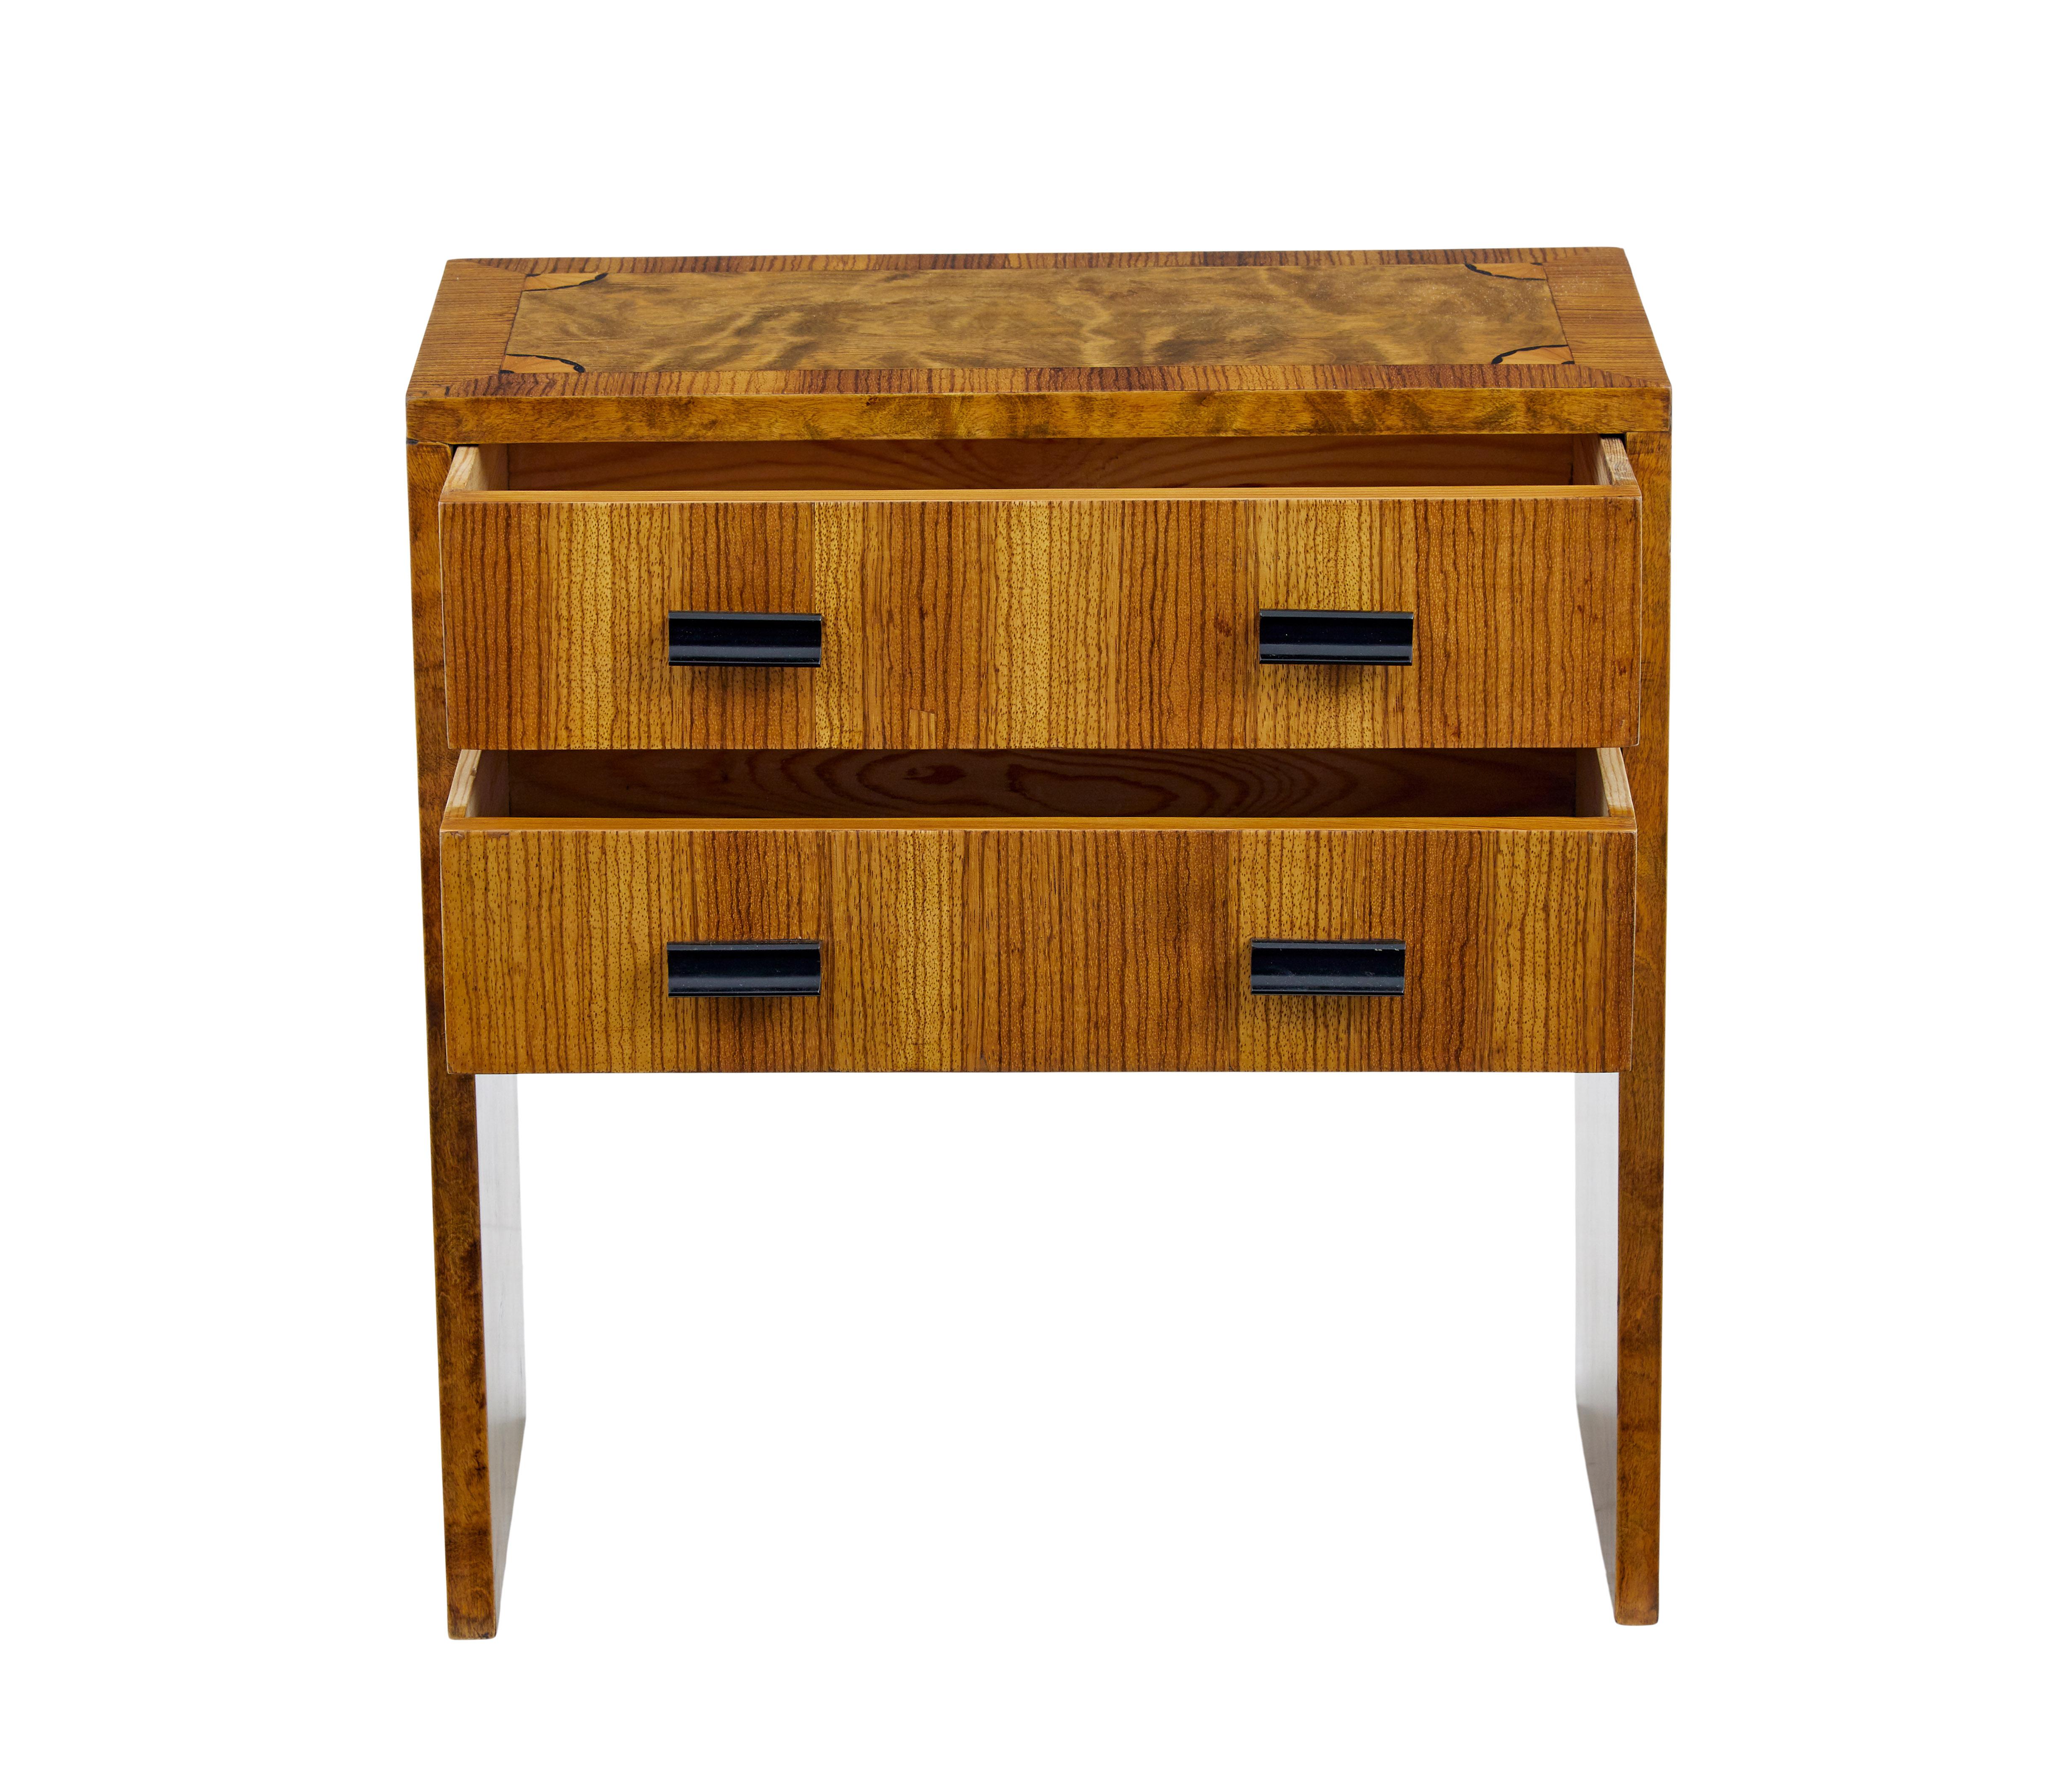 Swedish mid century birch and elm side table In Good Condition For Sale In Debenham, Suffolk